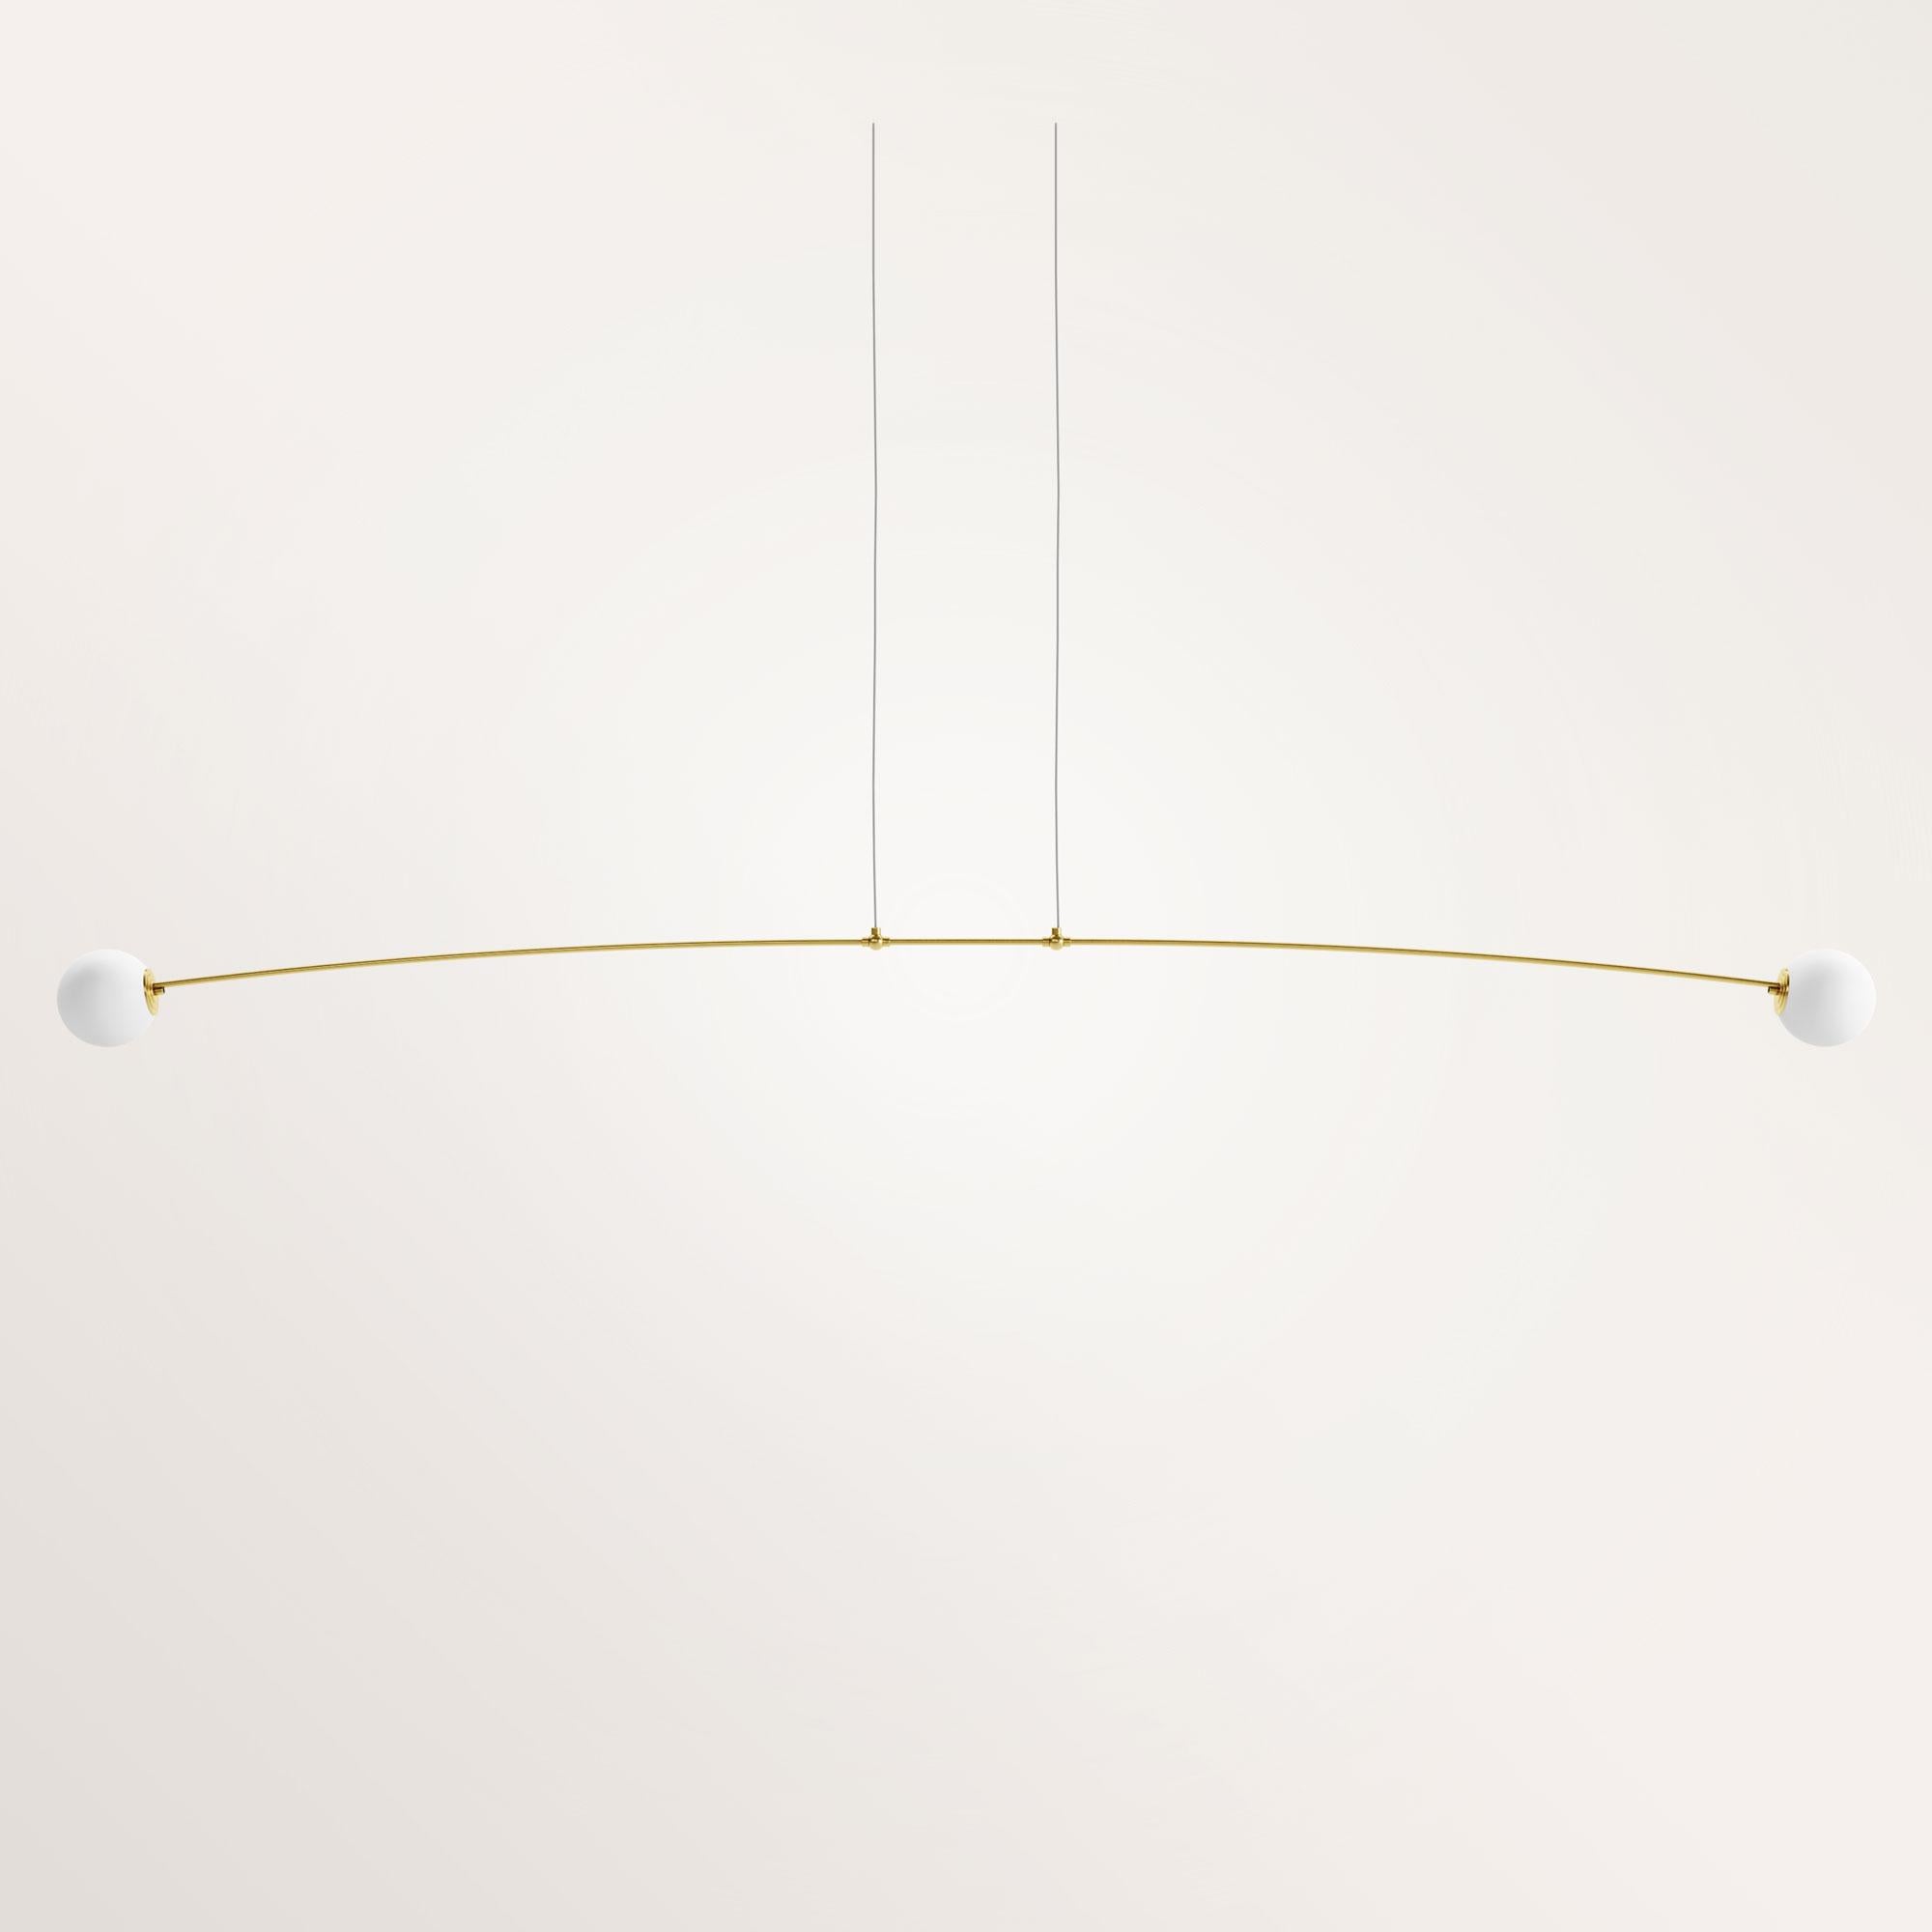 Handmade medium Nemesis II chandelier by Gobo Lights
Dimensions: 220 L x 12 l x 100 H
Materials: Brass, opaline

Nemesis is the Greek Goddess of fair anger, revenge and balance which has inspired this light. 

Self-taught and from the world of